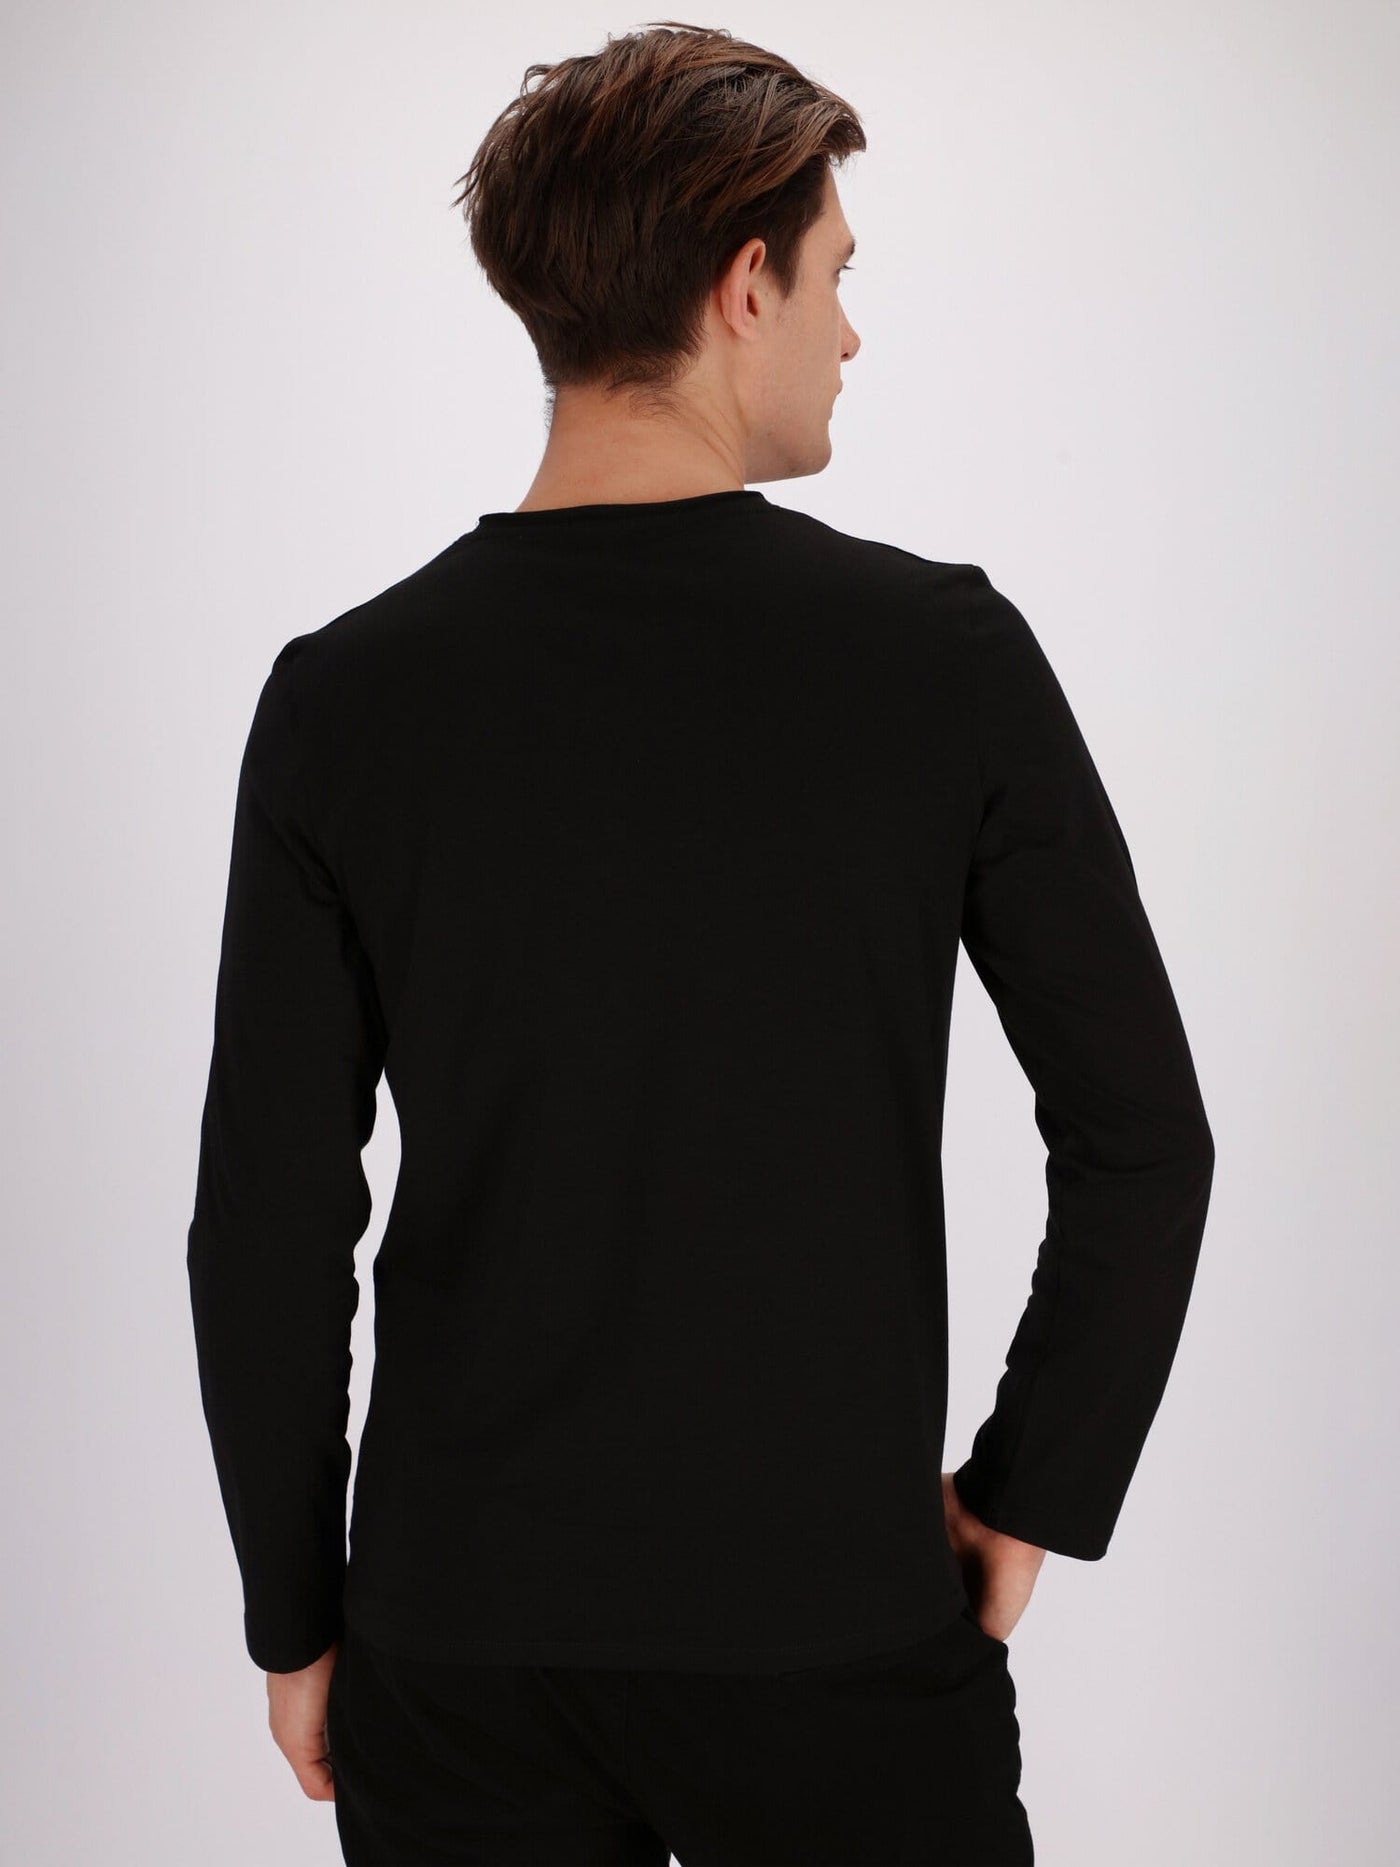 OR T-Shirts Chest Pocket Round Neck T-Shirt